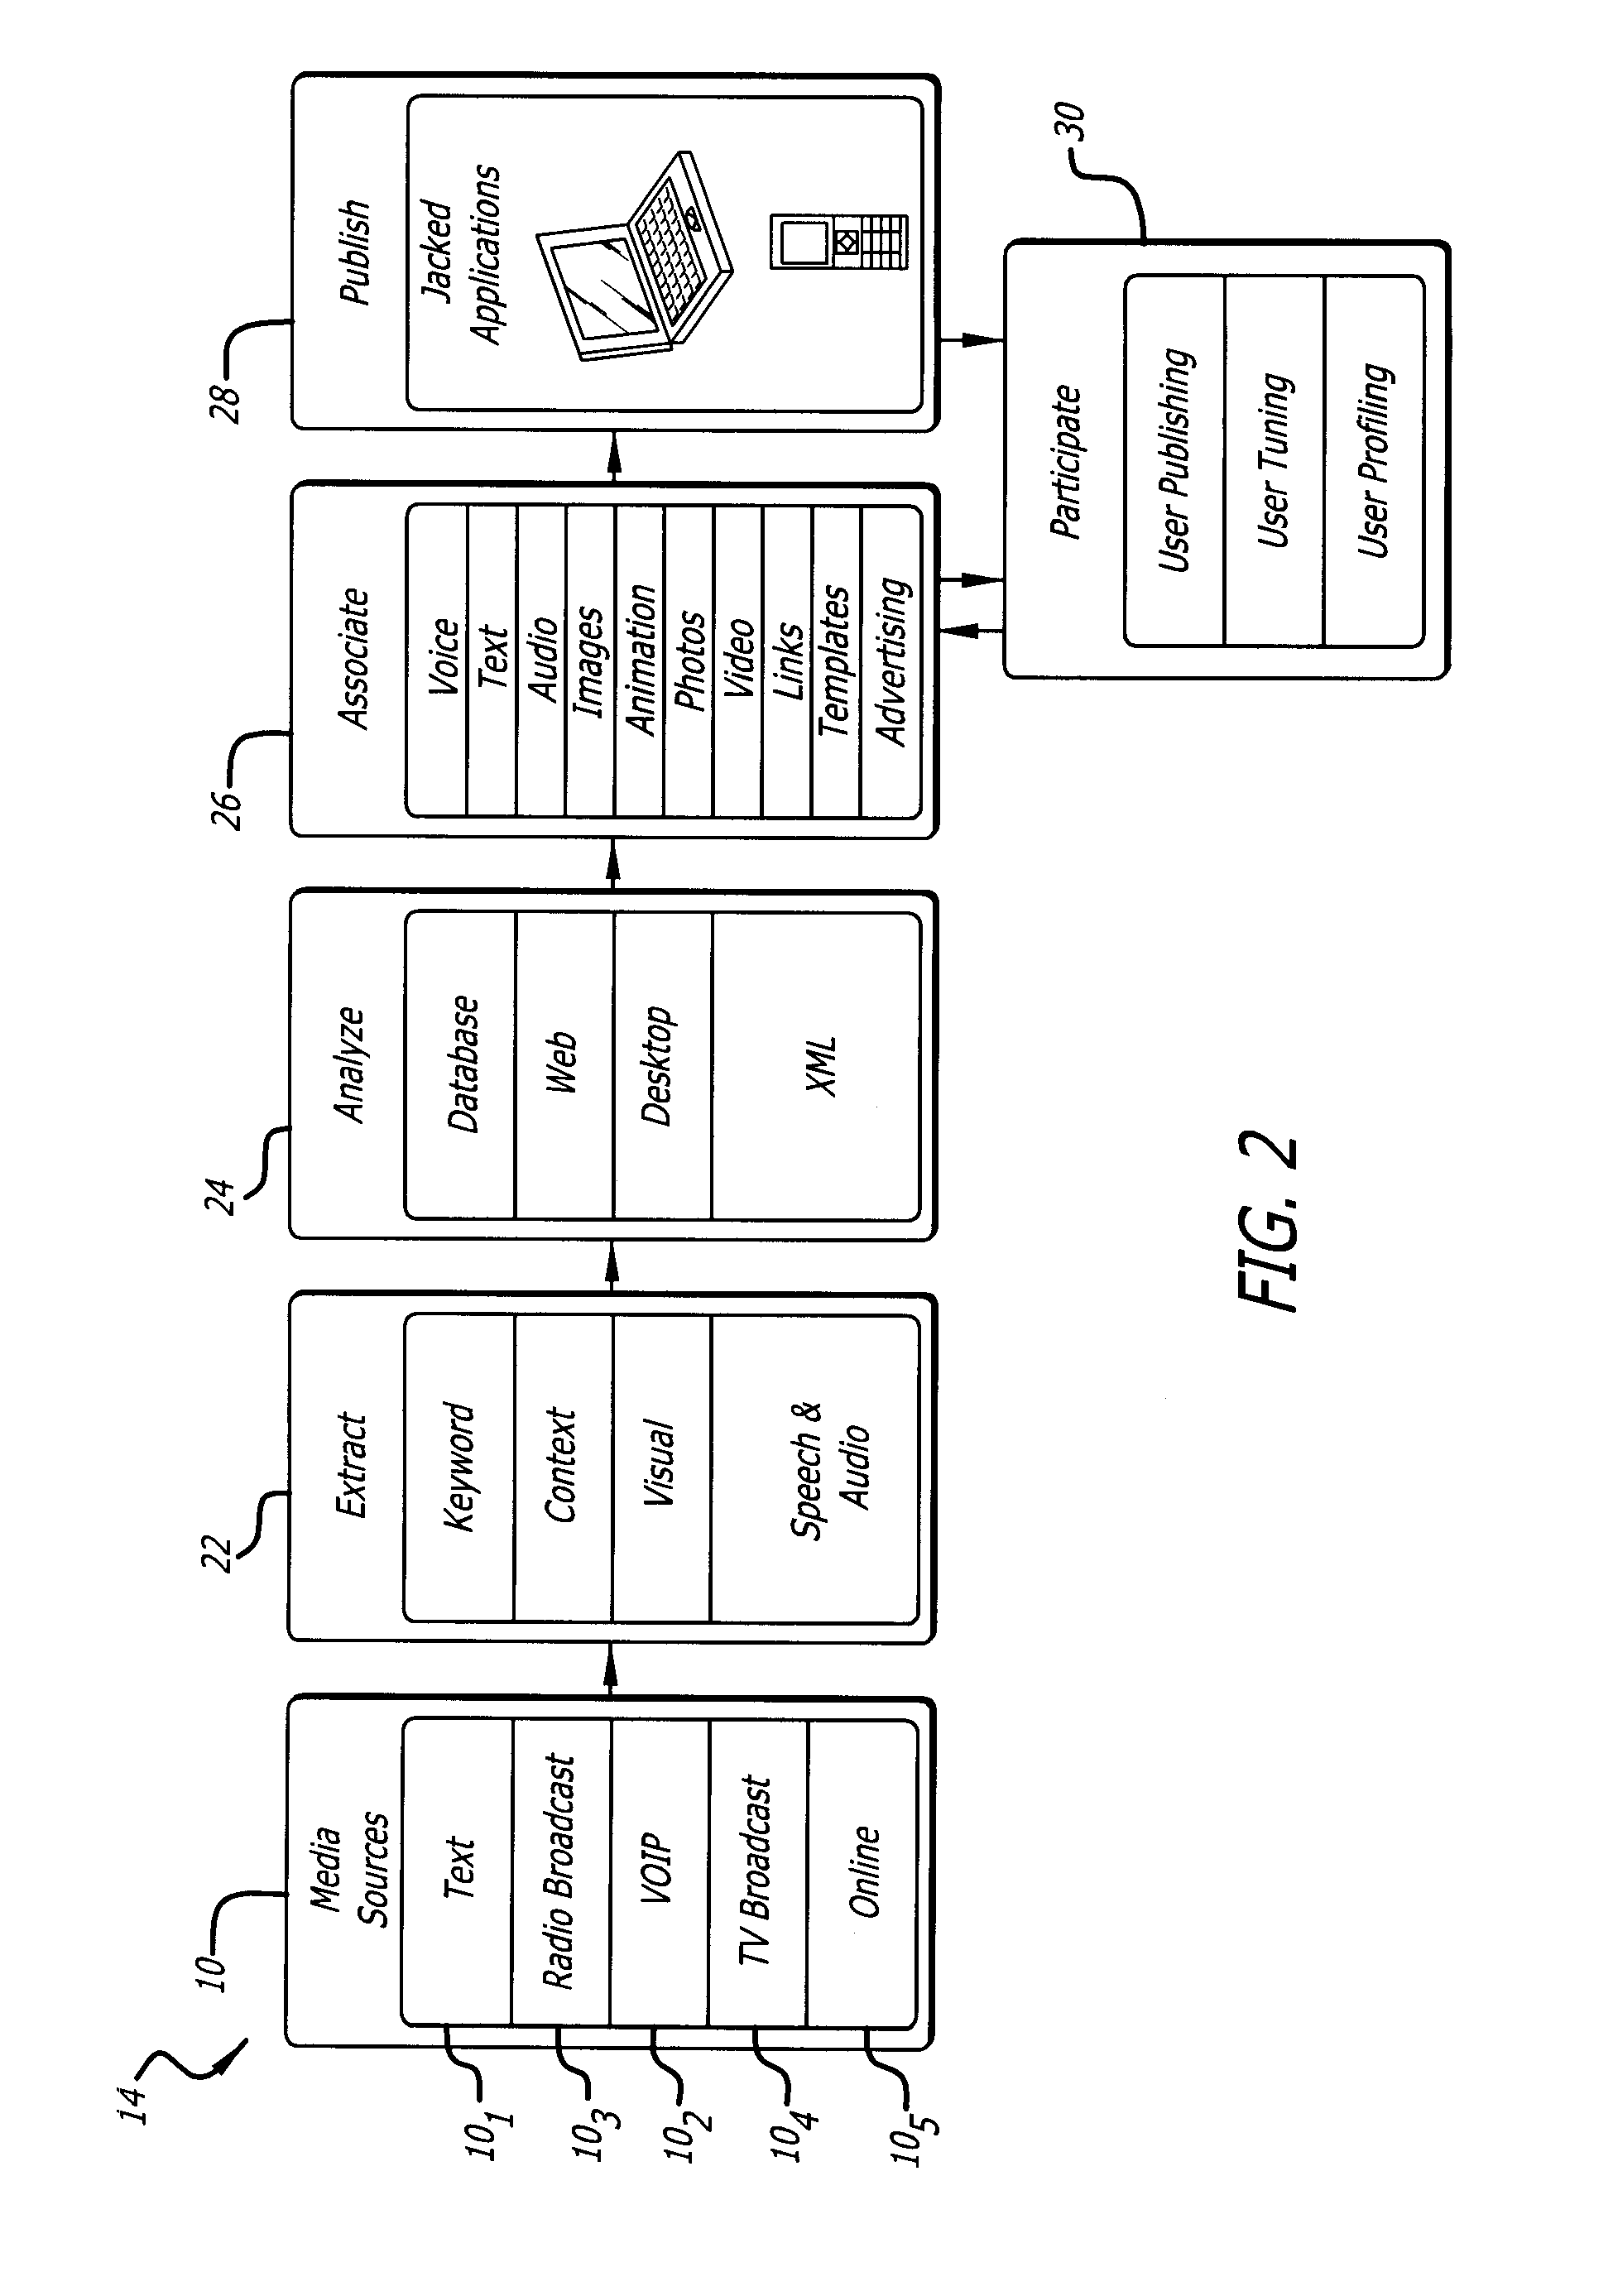 System for providing secondary content based on primary broadcast